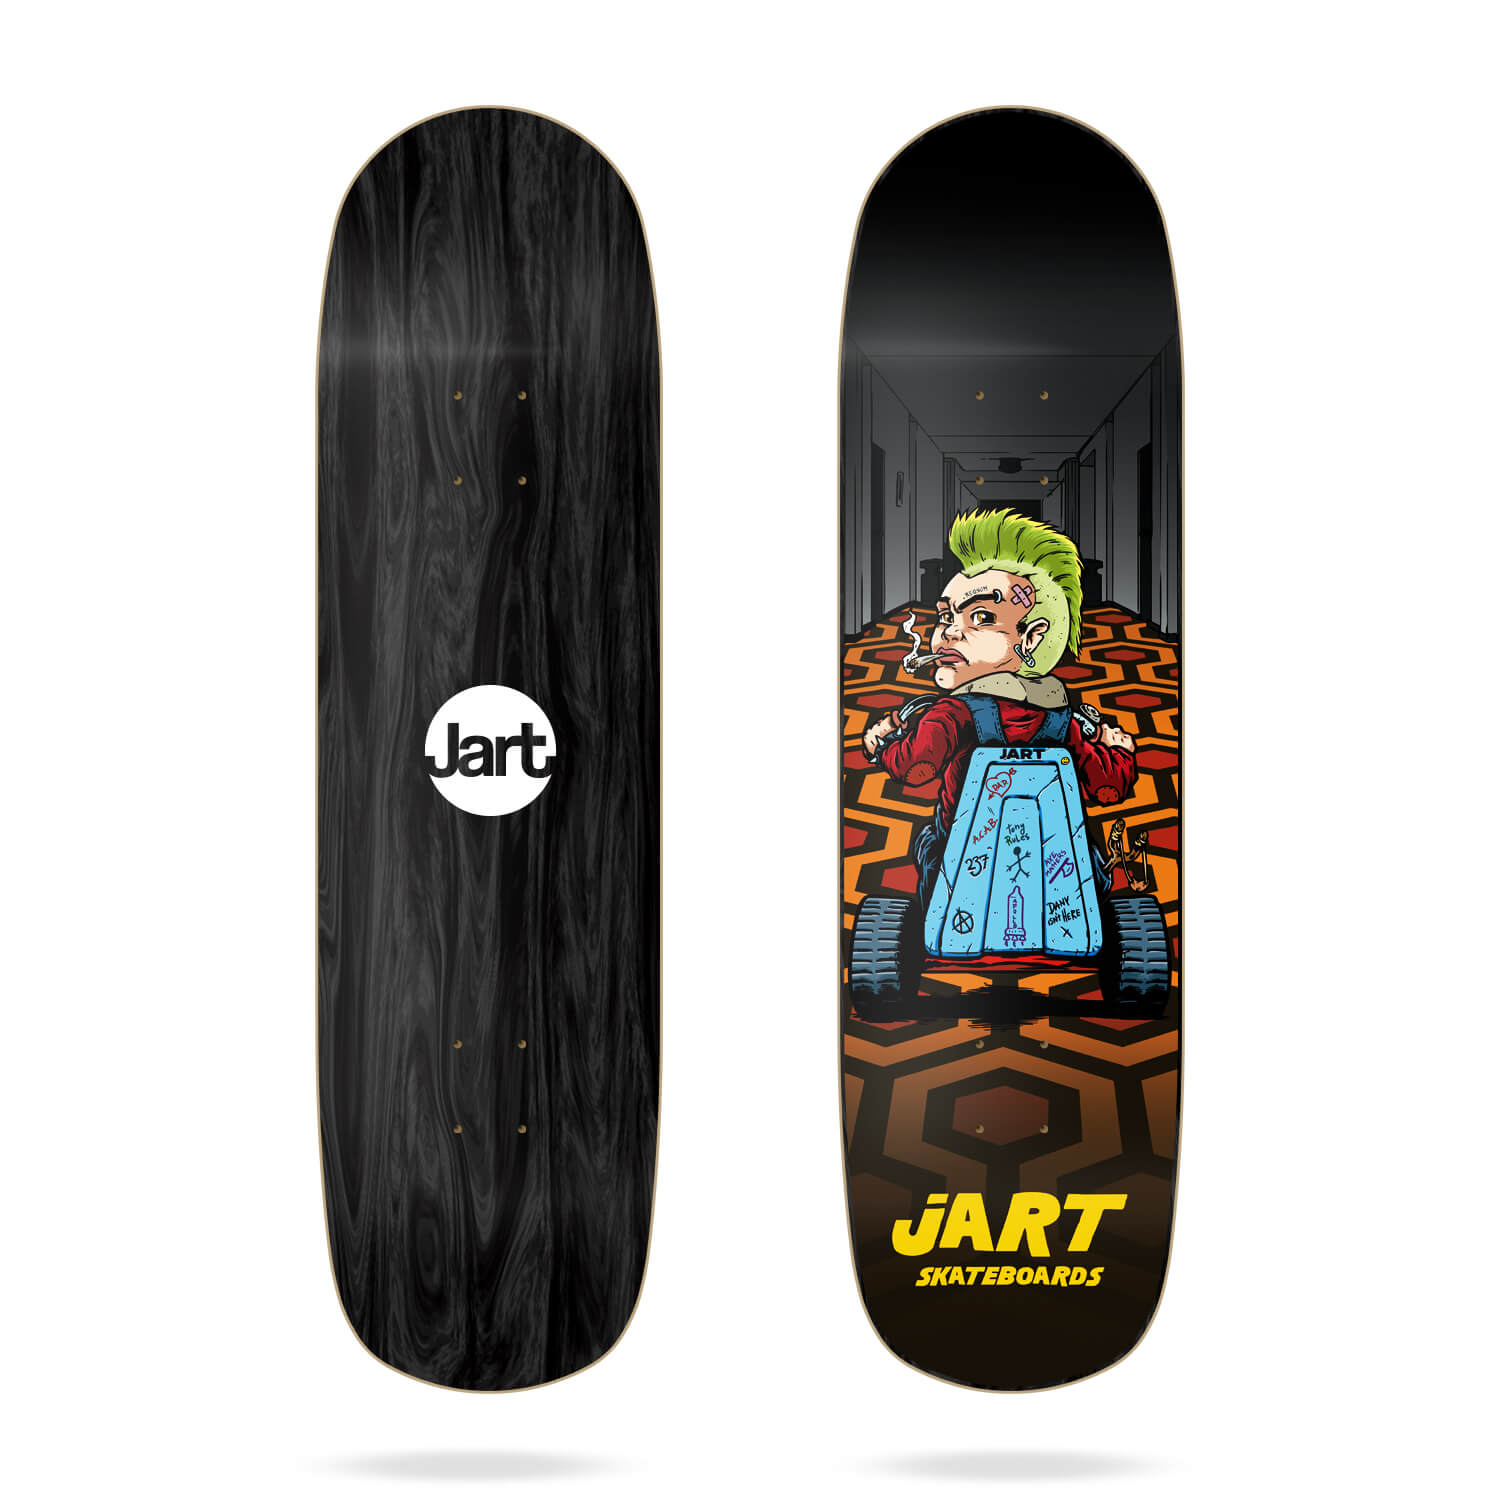 Jart The Shining 8.625" Pool Before Death deck